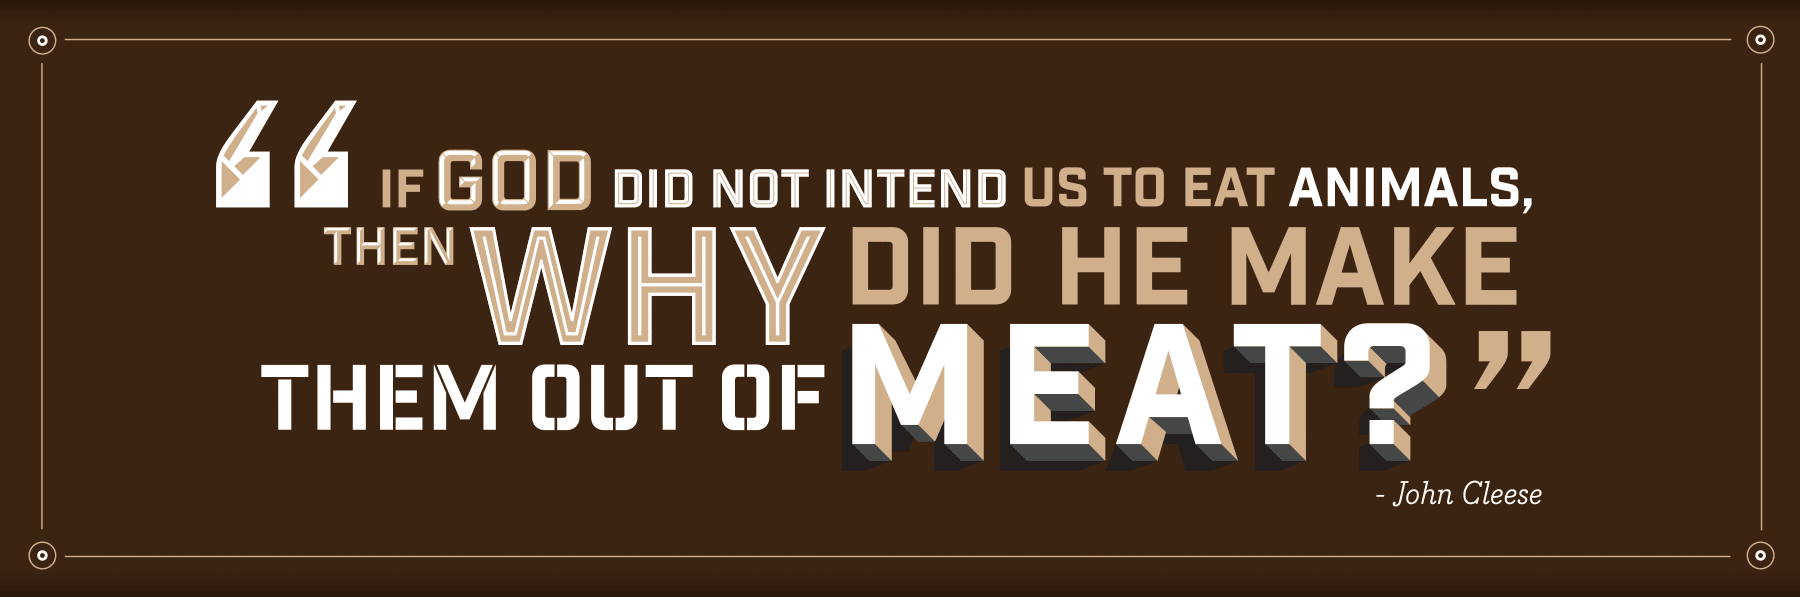 If god did not intend us to eat animals, then why did he make them out of meat?